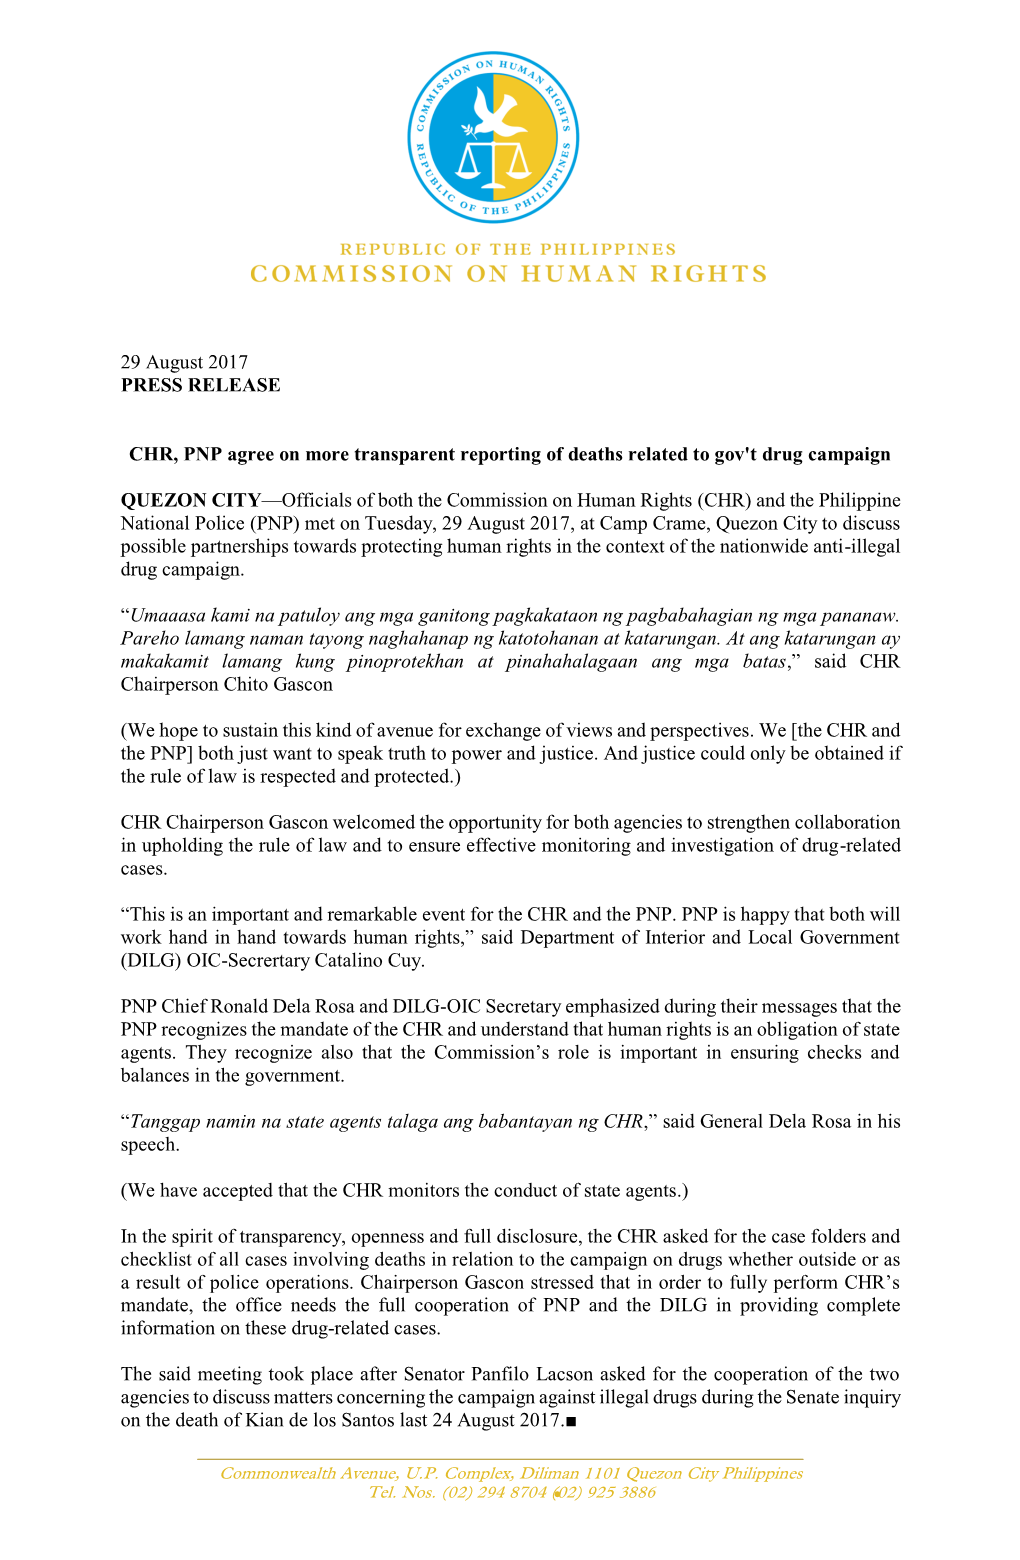 29 August 2017 PRESS RELEASE CHR, PNP Agree on More